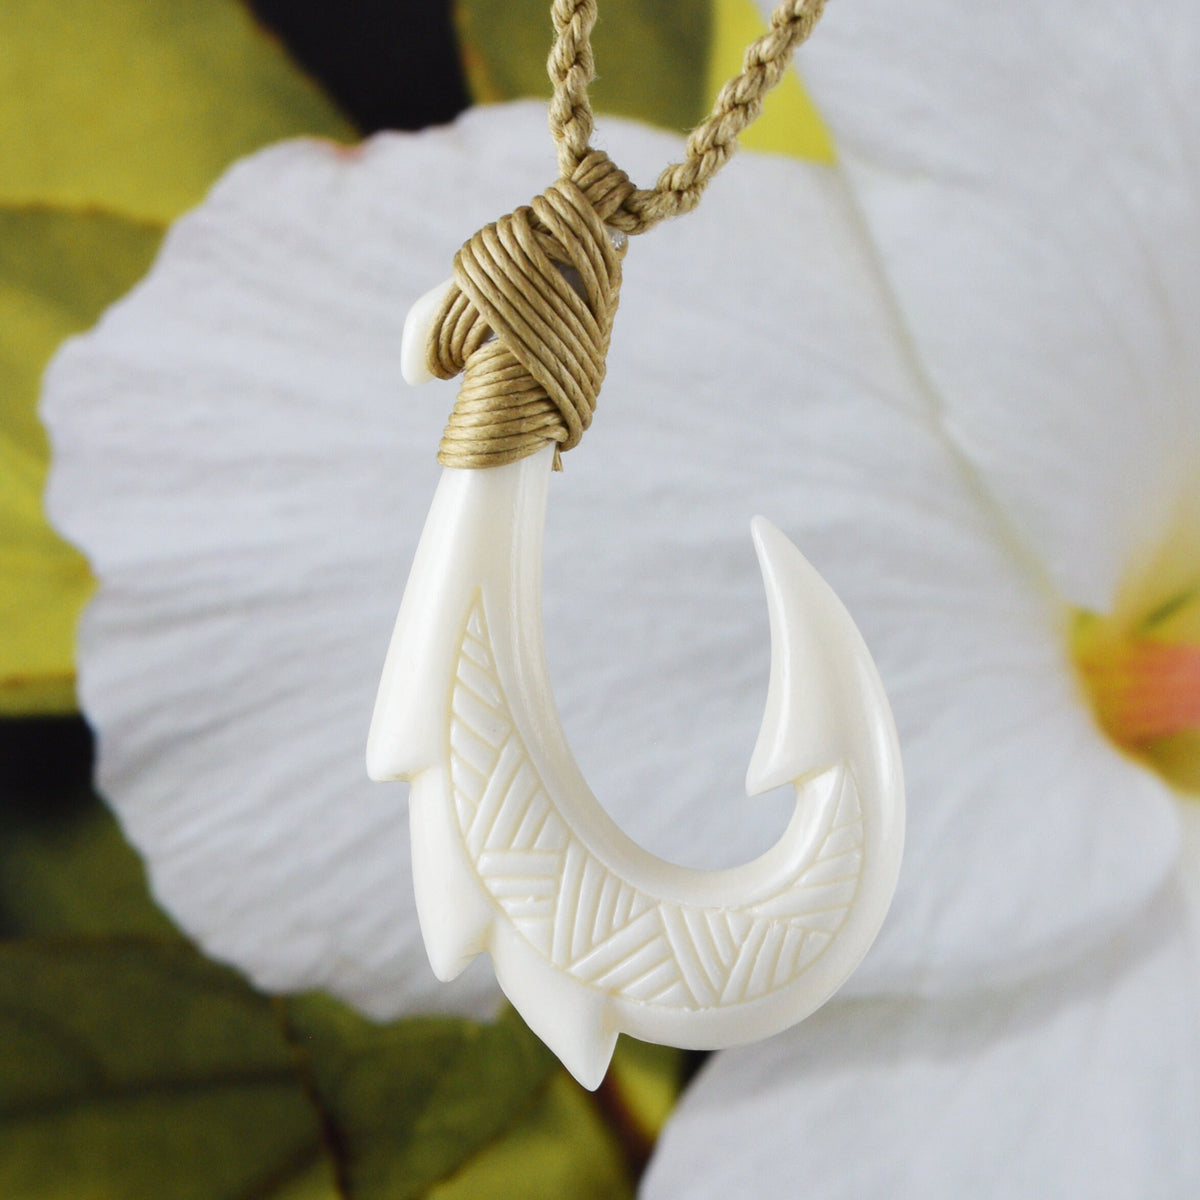 Unique Gorgeous Hawaiian X-Large Fish Hook Necklace, Hand Carved Buffalo Bone  Fish Hook Necklace, N9430 Birthday Men Dad Valentine Gift 